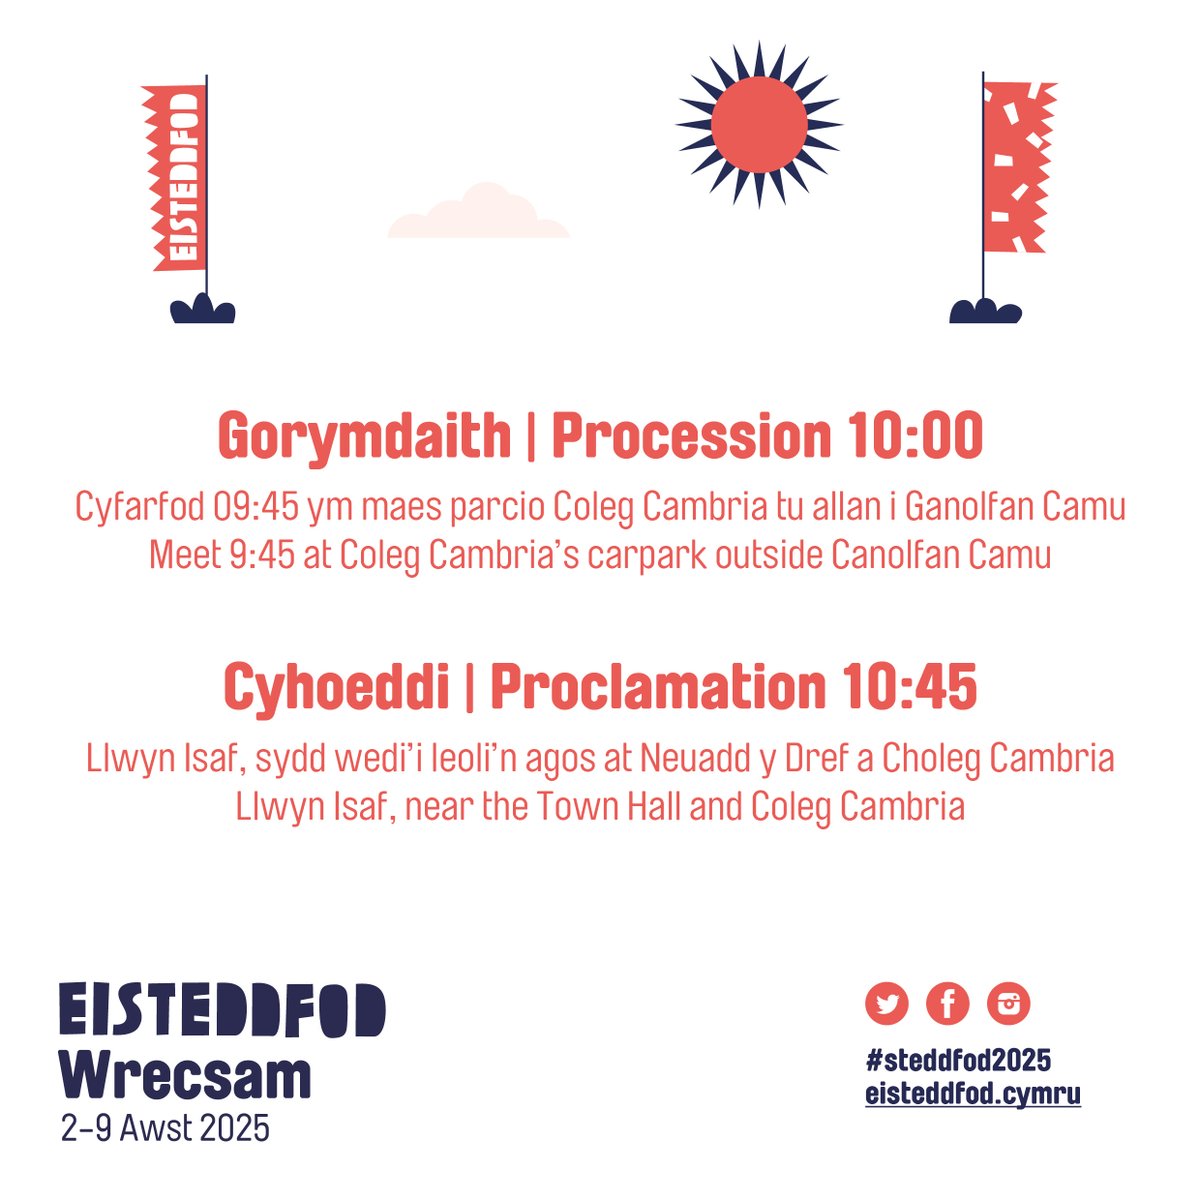 📣 Come and be part of Eisteddfod Wrecsam 2025 Proclamation Ceremony on 27 April 2024. 🤗 Want to be part of the community procession? Register today! eisteddfod.wales/community-proc… ℹ️ More information on our website: eisteddfod.wales/festival/2025/…